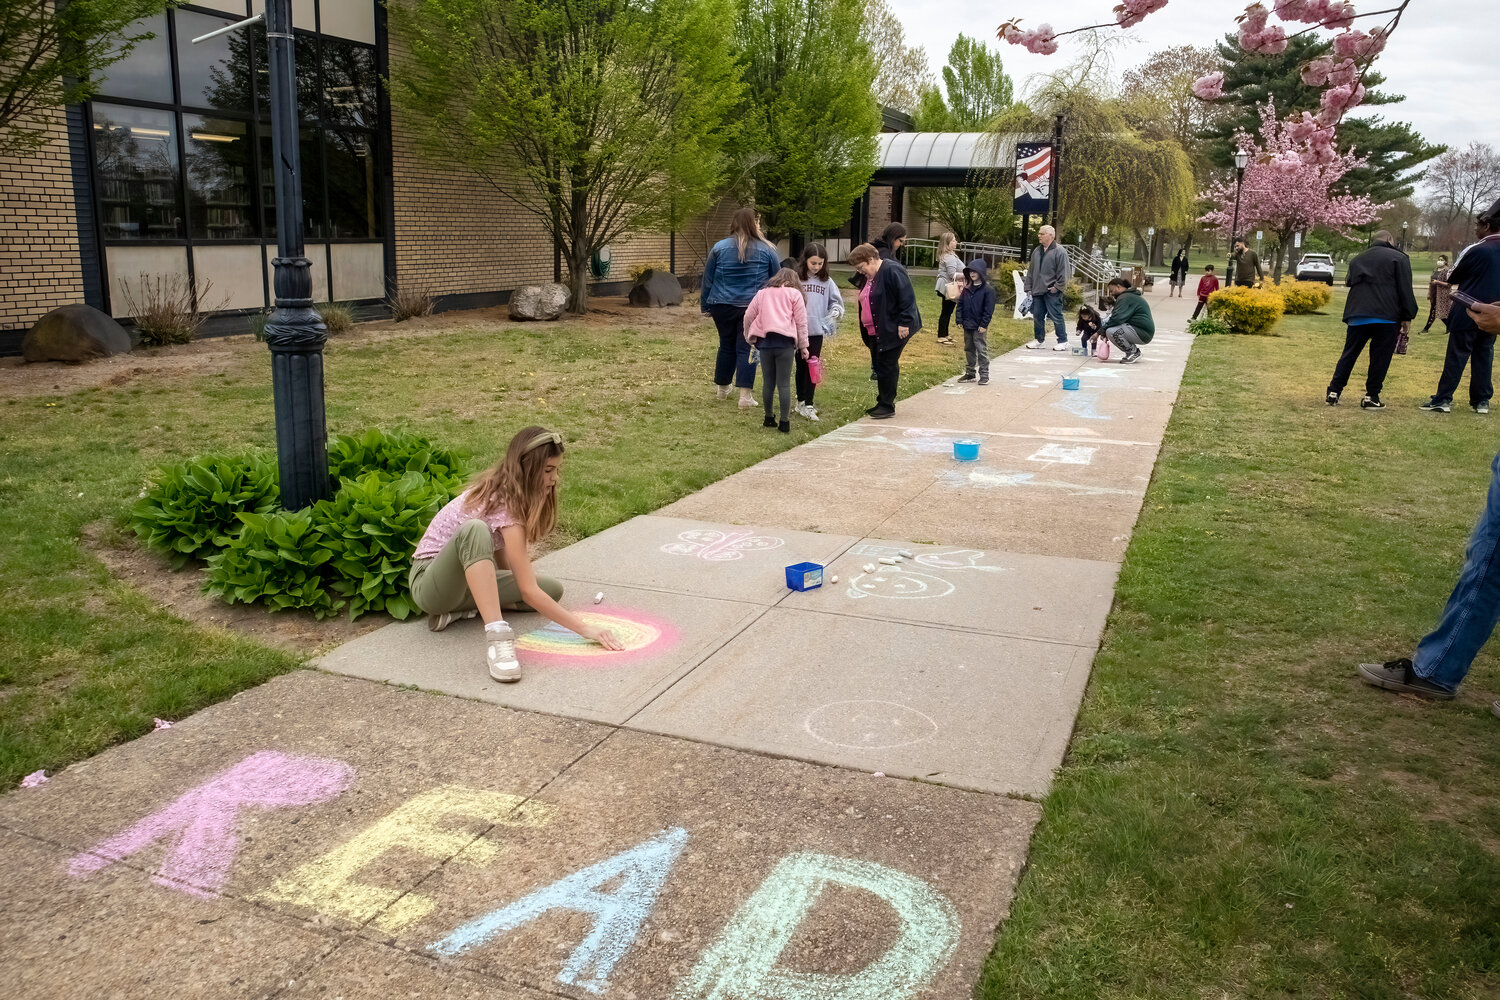 The sidewalk outside the Henry Waldinger Memorial Library and Village Hall was covered in chalk last Saturday during the library’s annual chalk show.